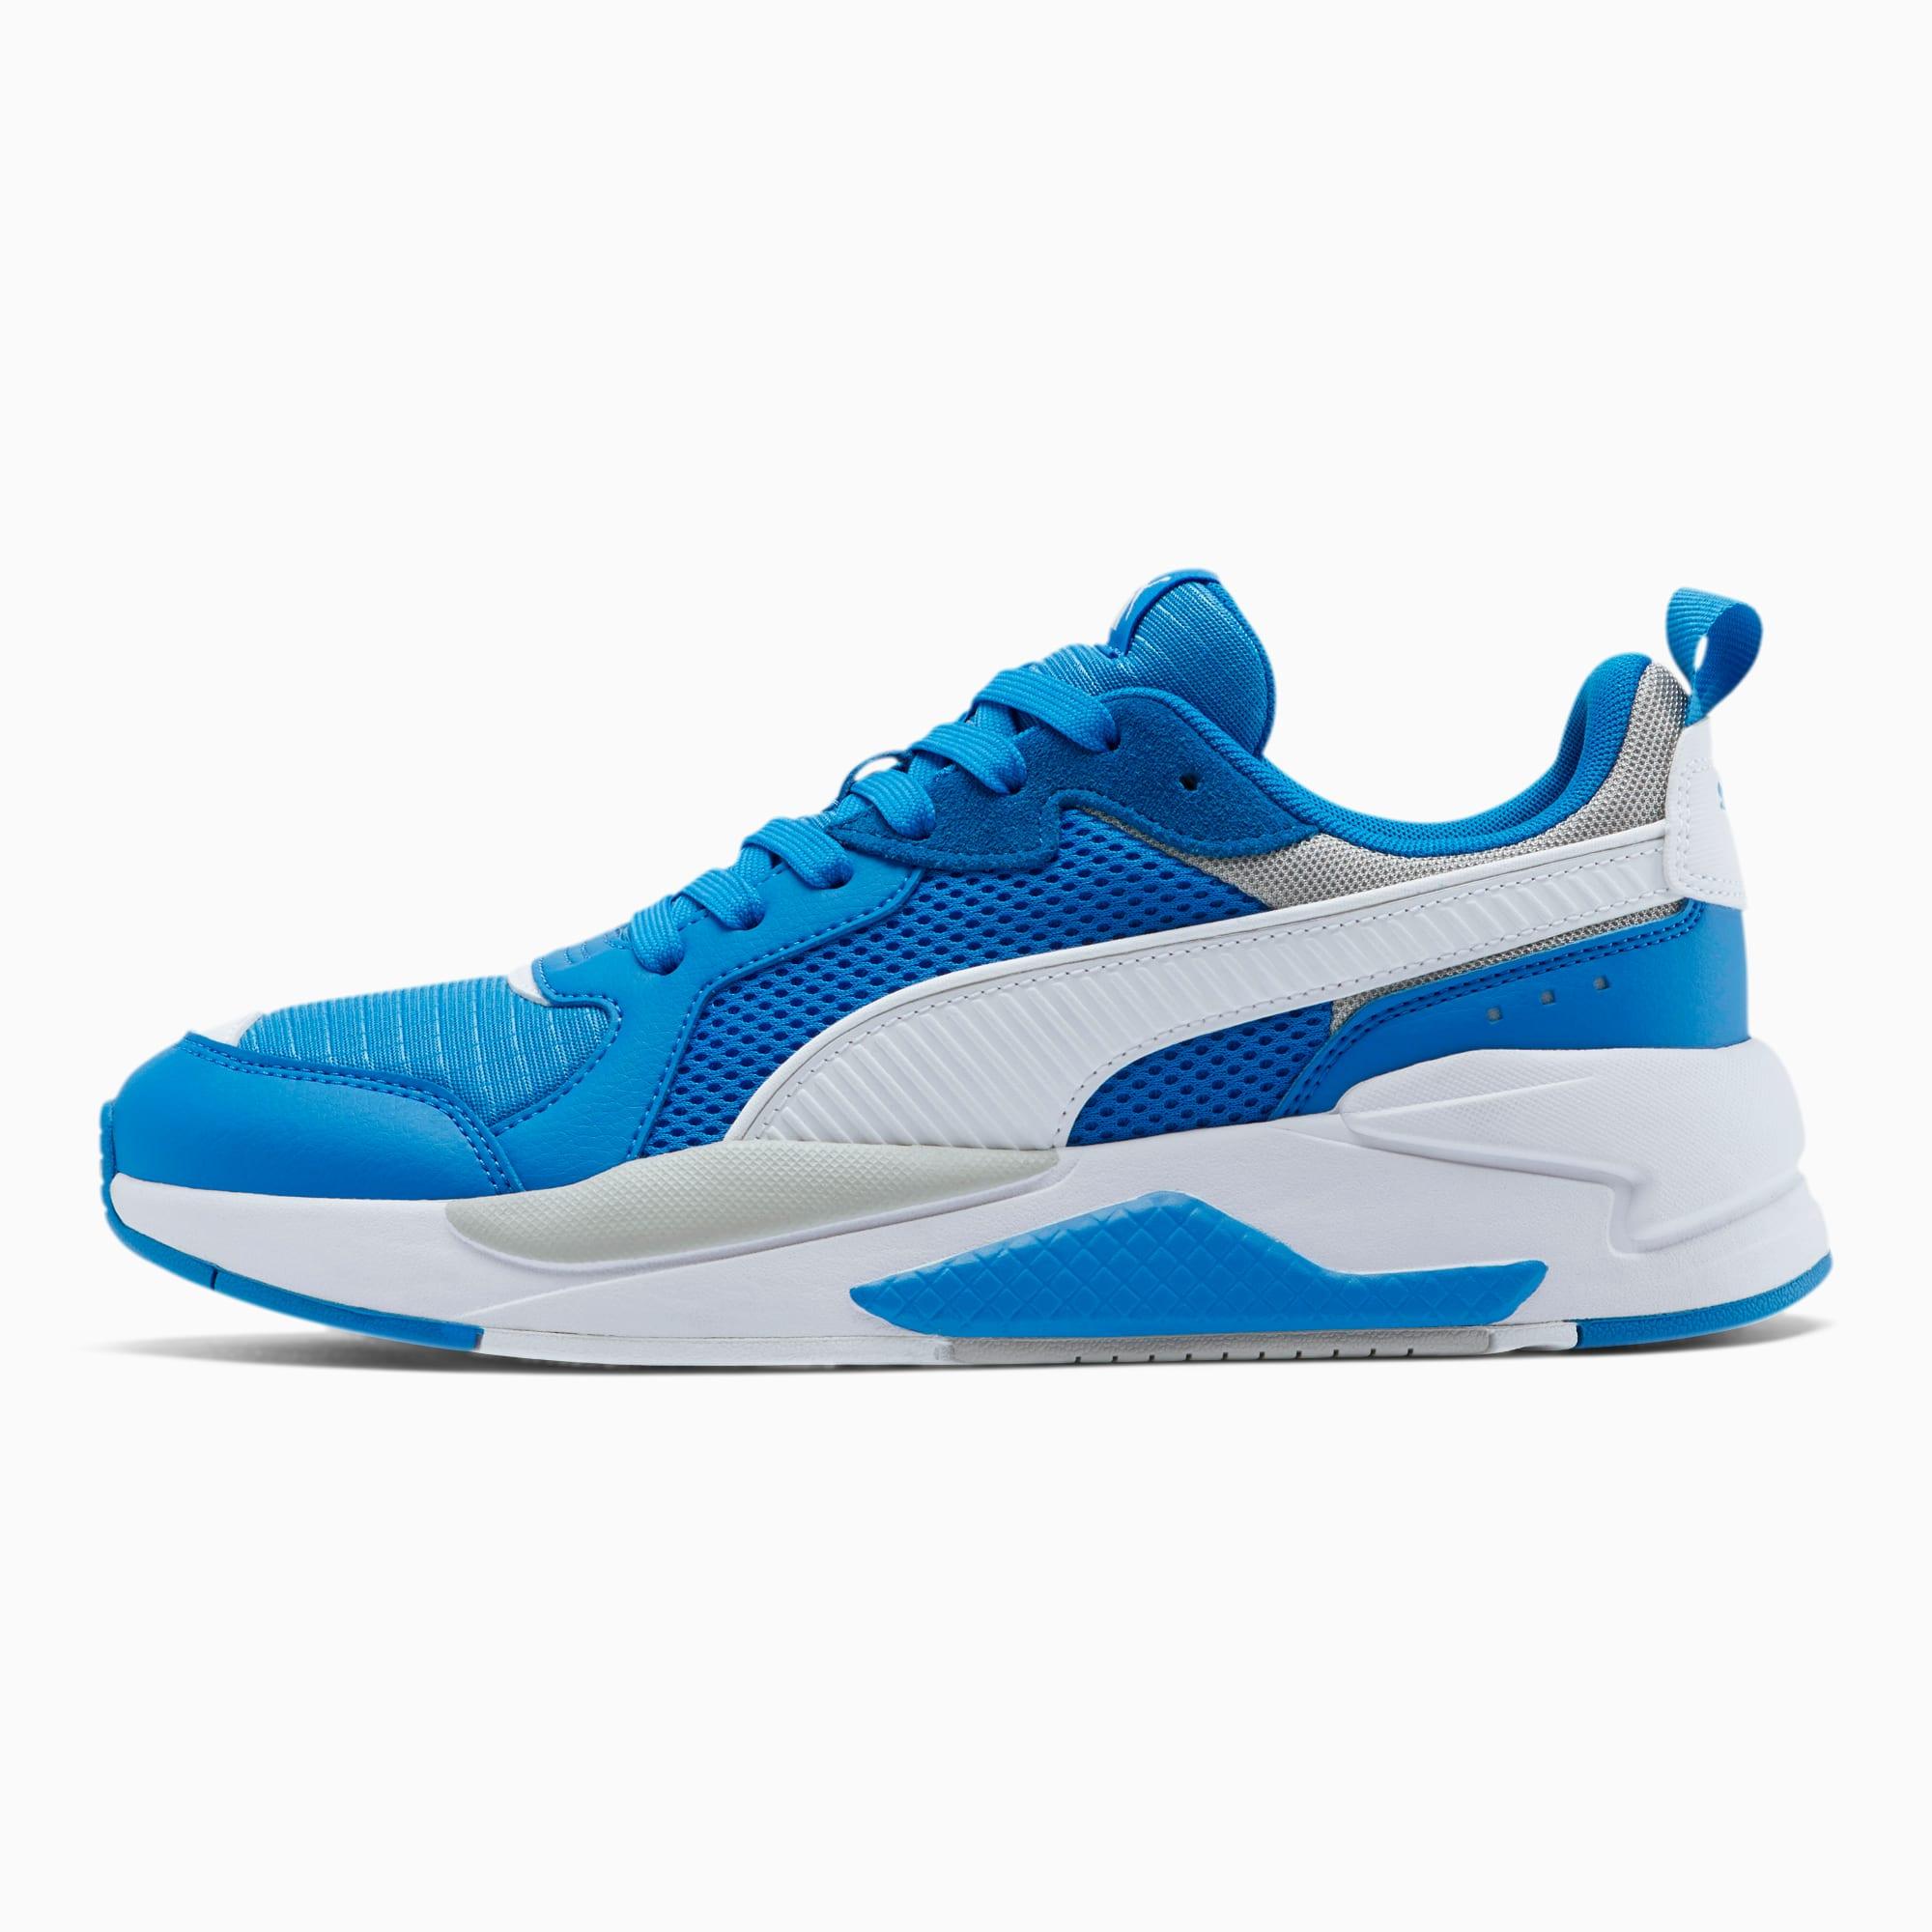 PUMA Suede X-ray Colorblock Sneakers in Blue for Men - Lyst